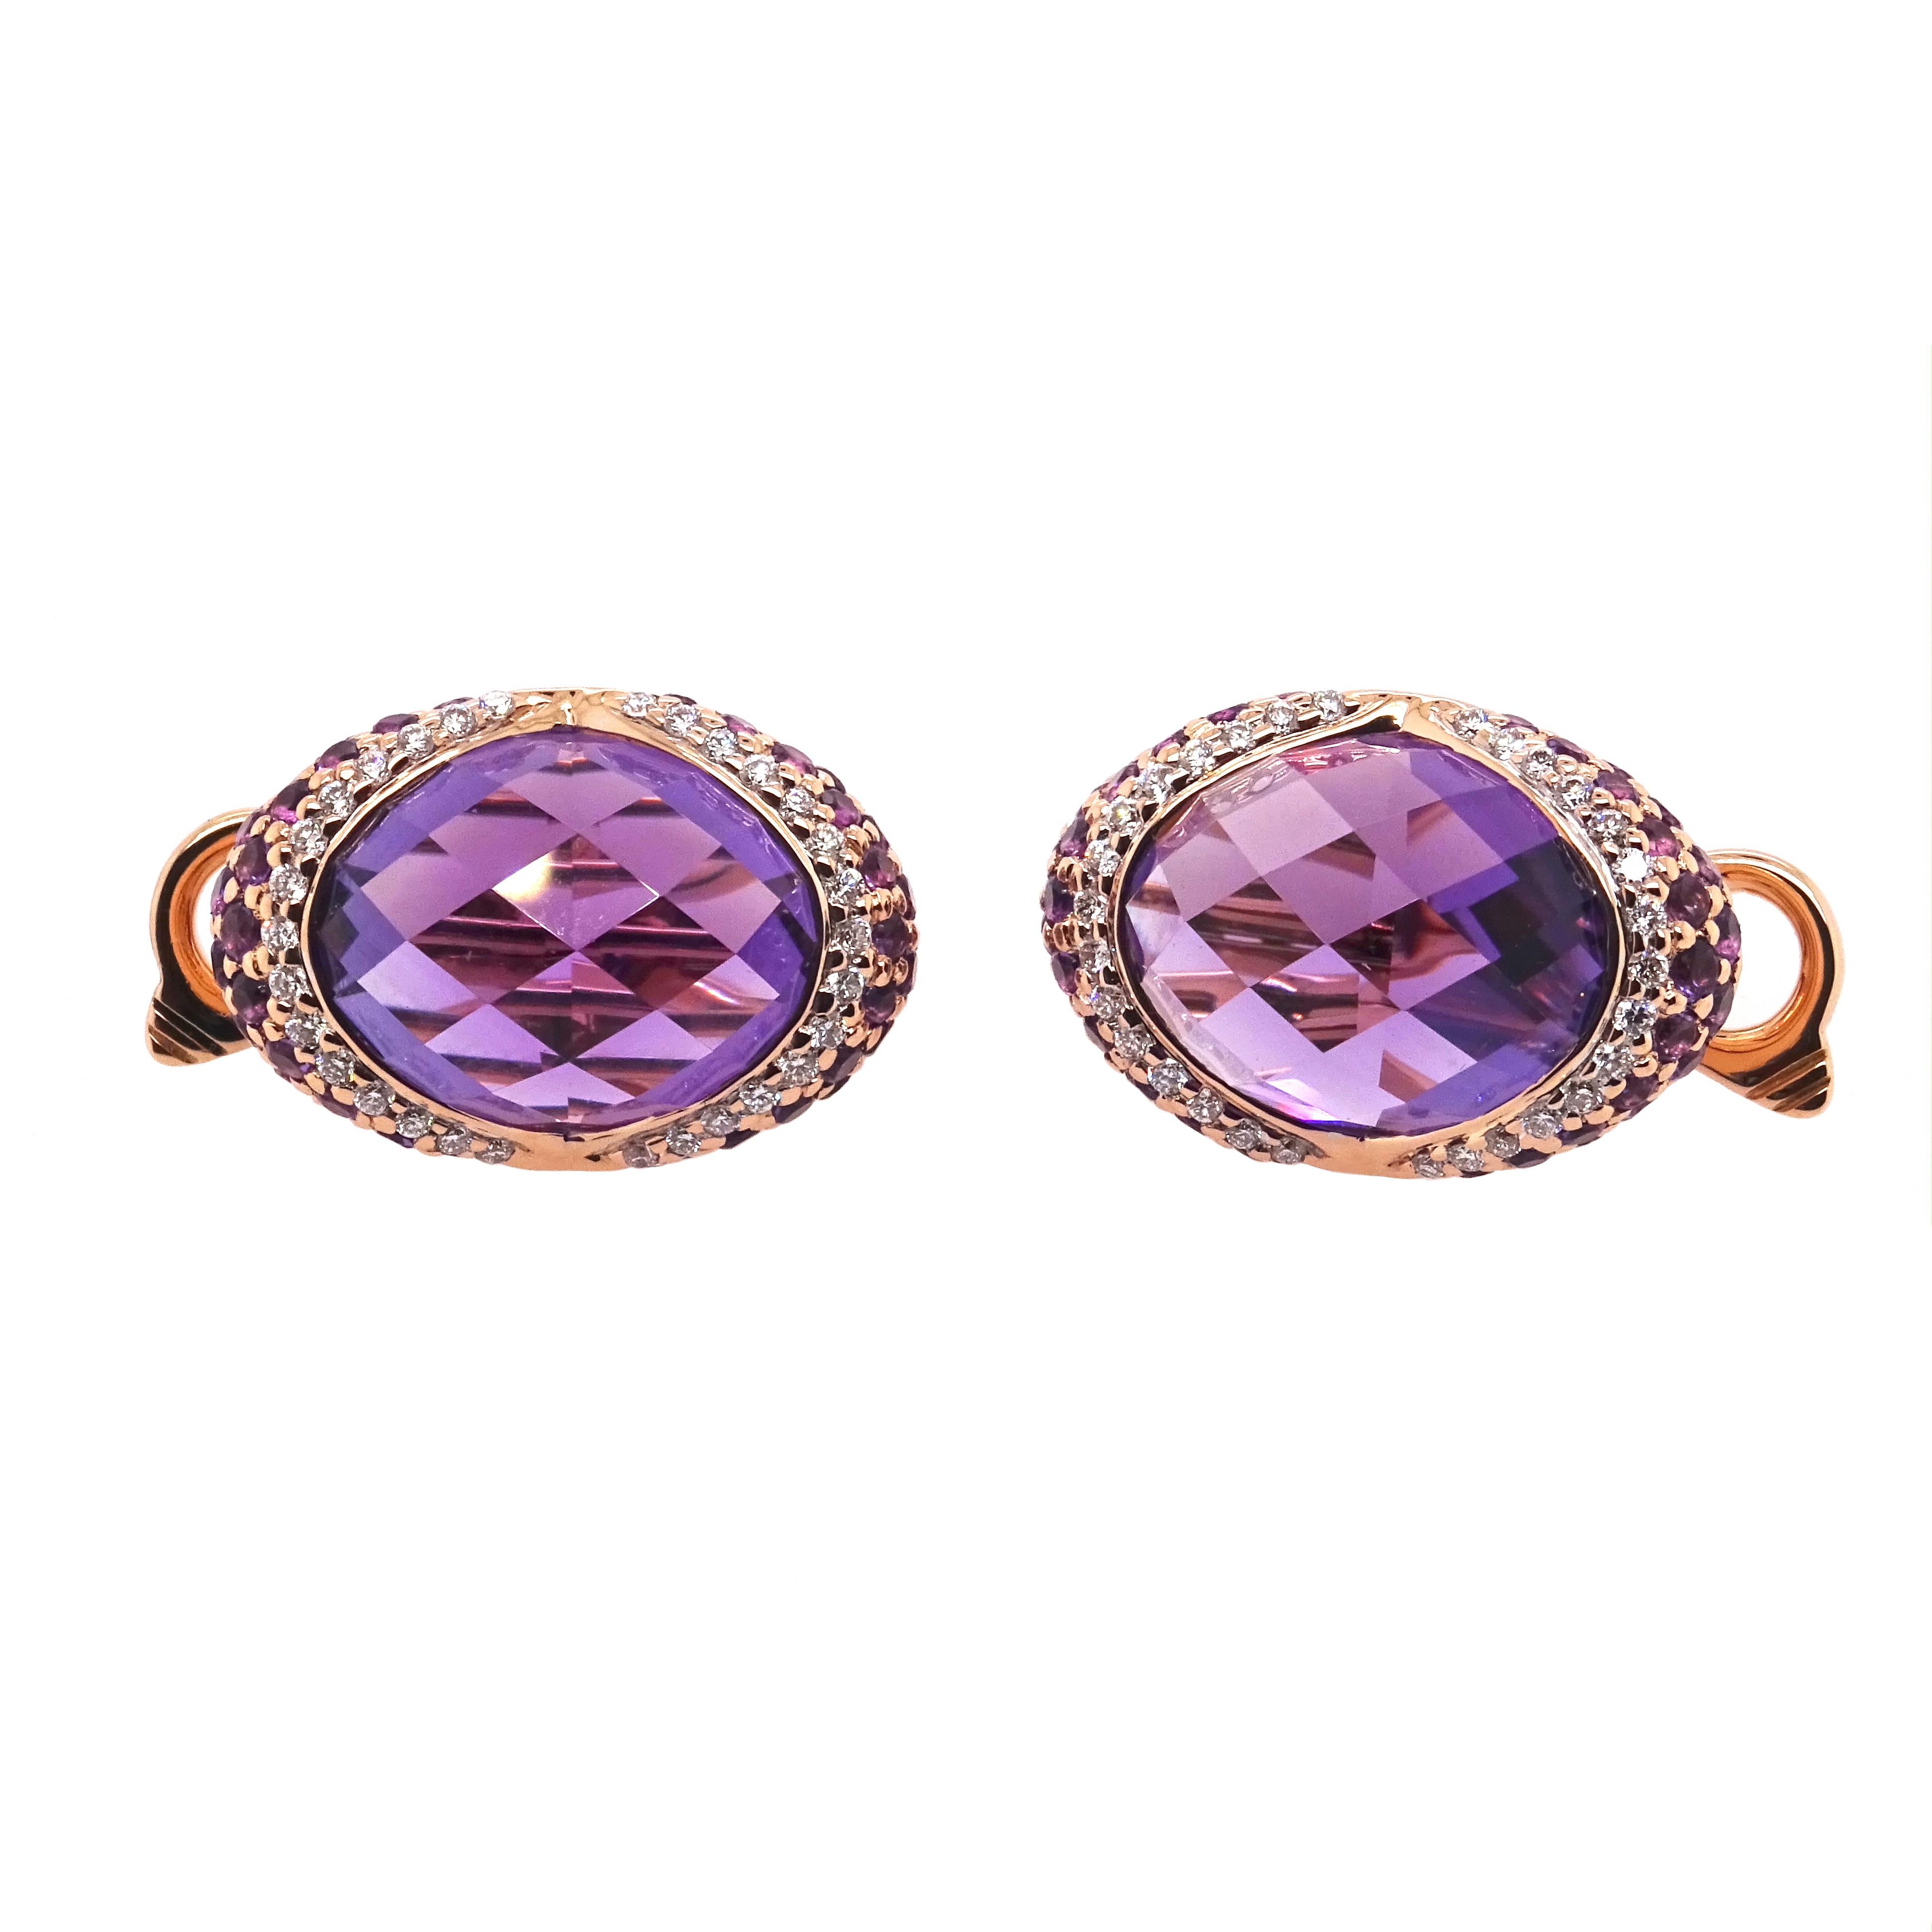 Embrace the allure of luxury with these stunning 18K yellow gold earrings, graced by the captivating beauty of a fancy-cut center amethyst. Enveloped by a mesmerizing halo of round white diamonds and further adorned with delicate amethysts on the